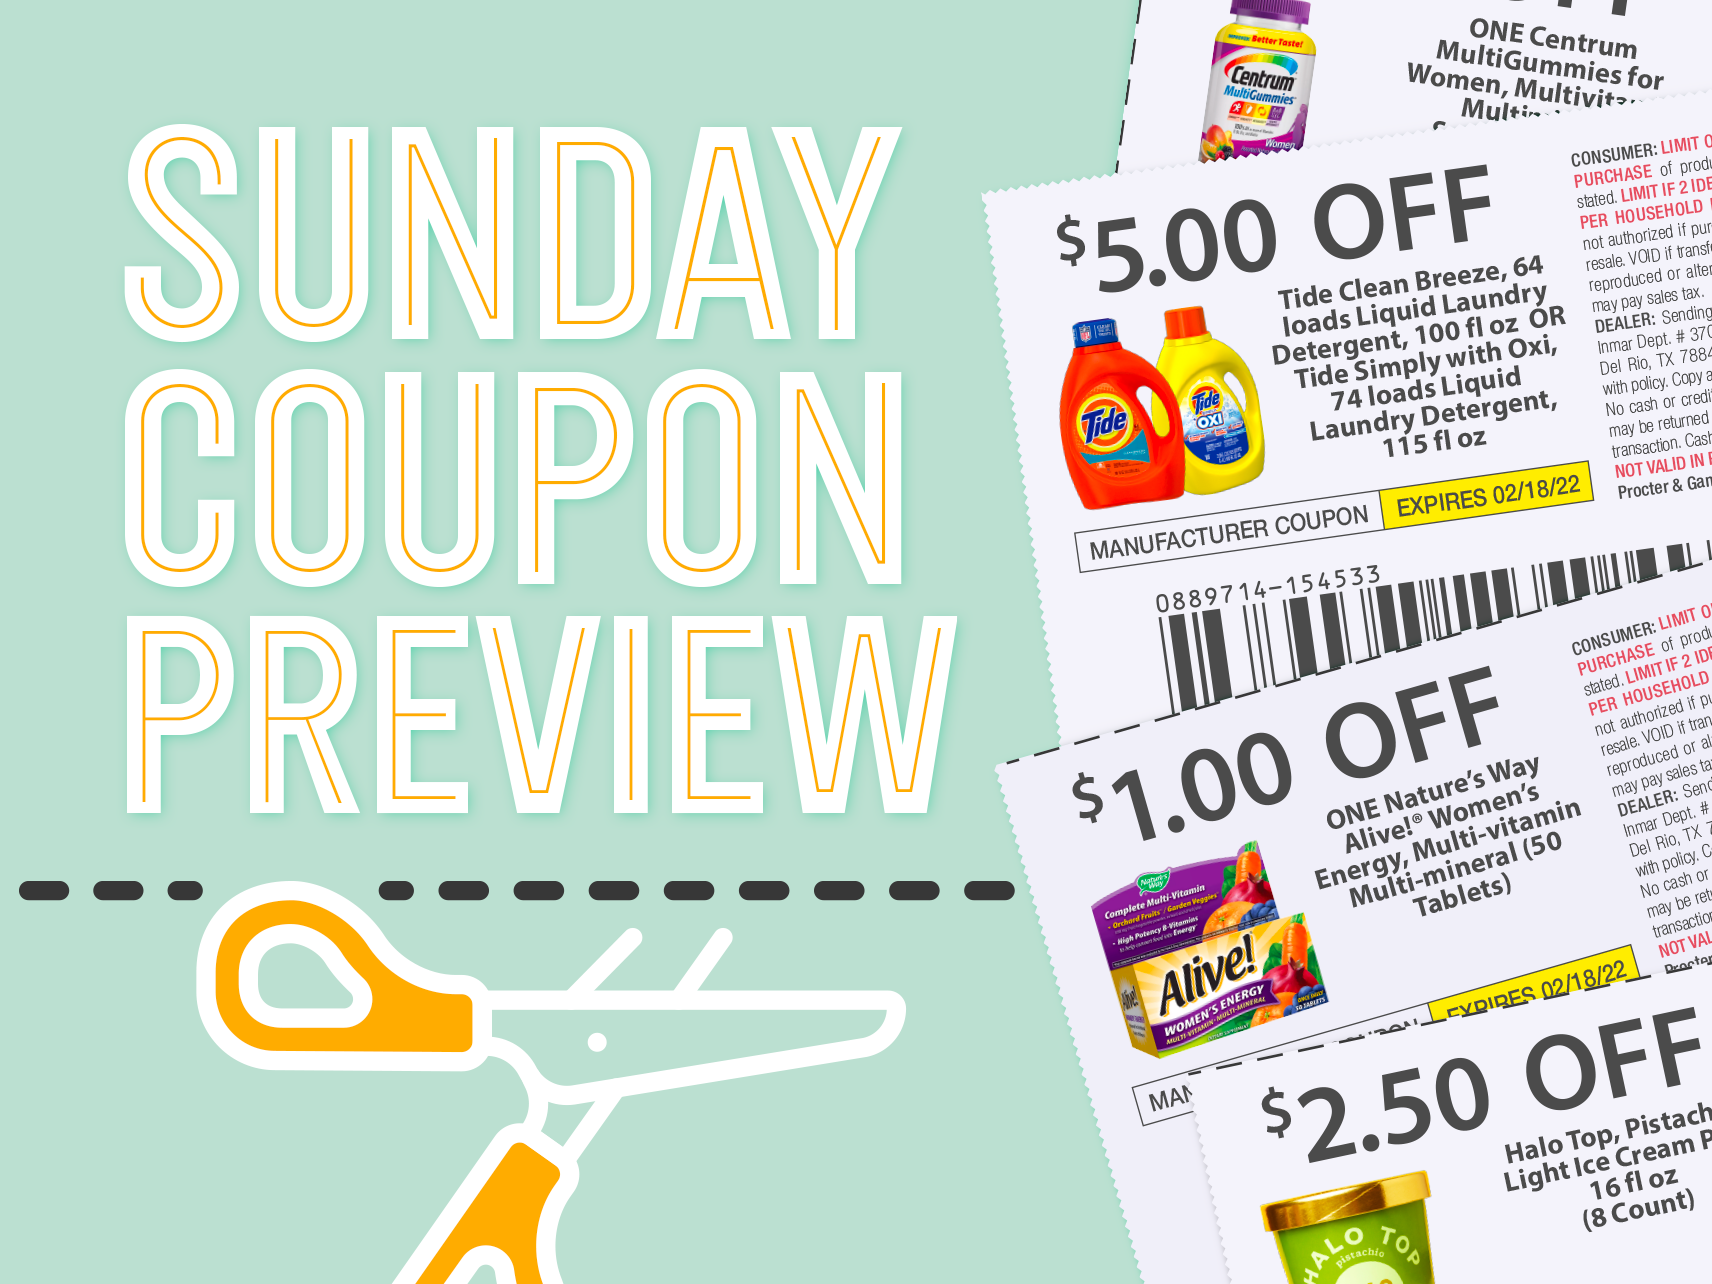 Sunday Coupon Preview For 9/11 – Three Inserts